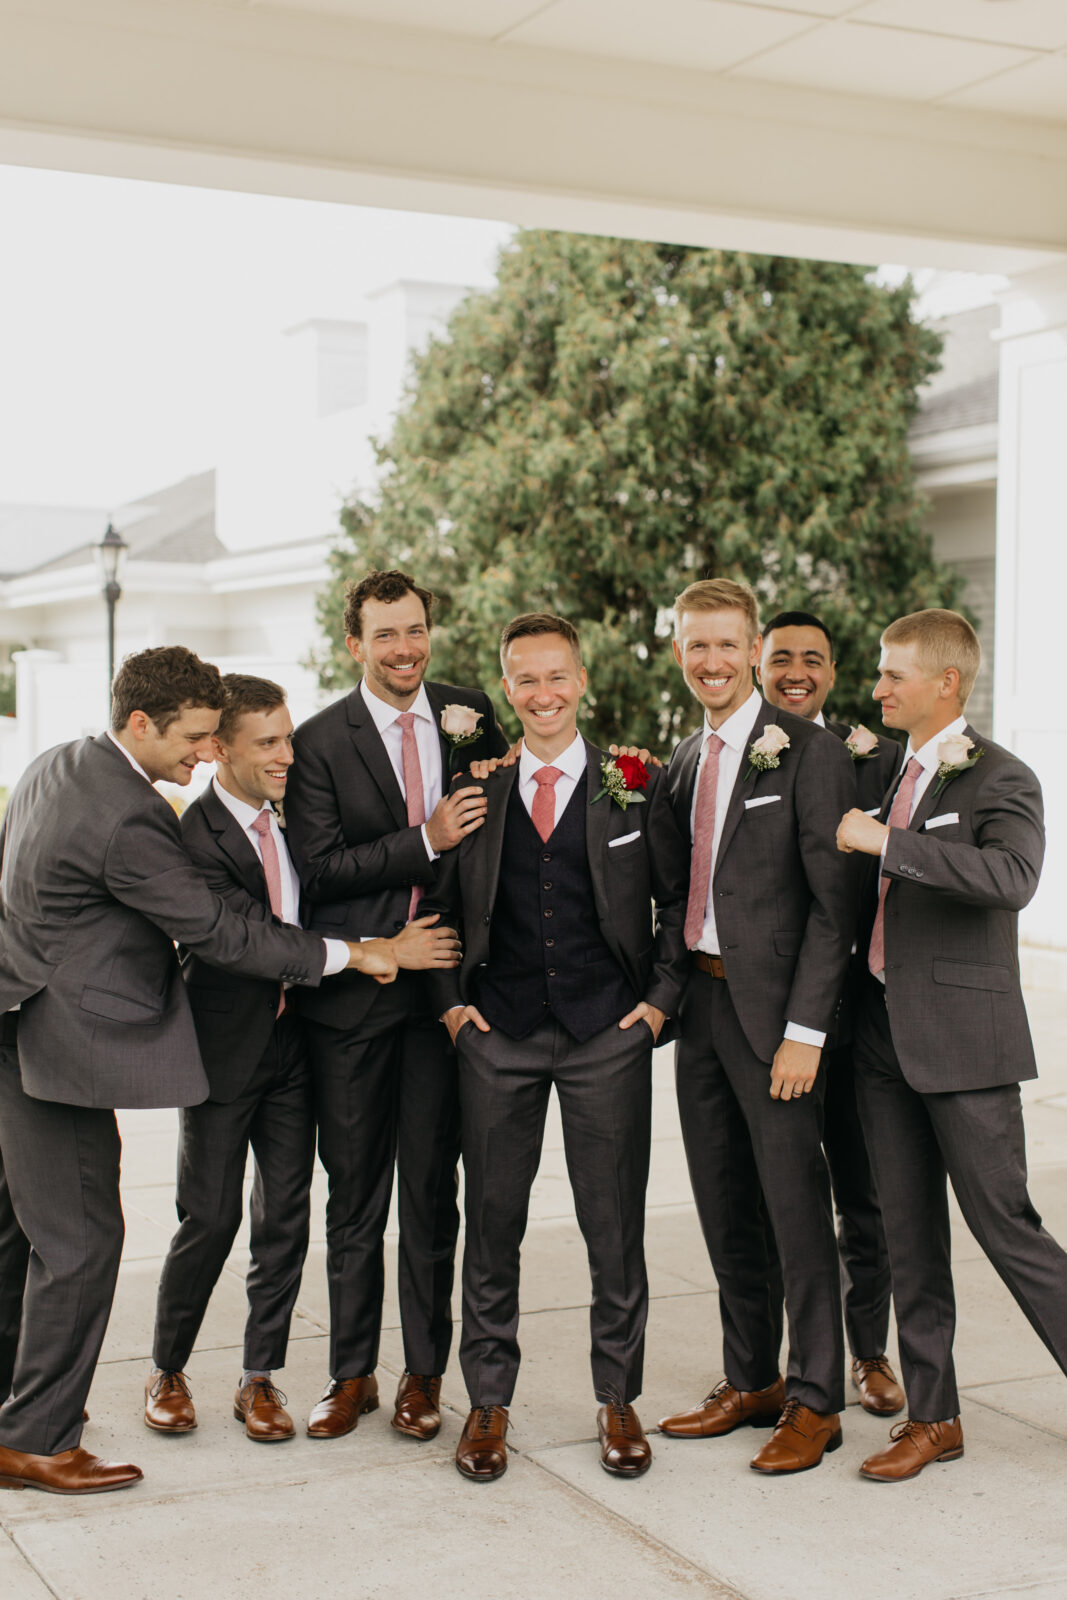 Photo of the groom and his groomsmen